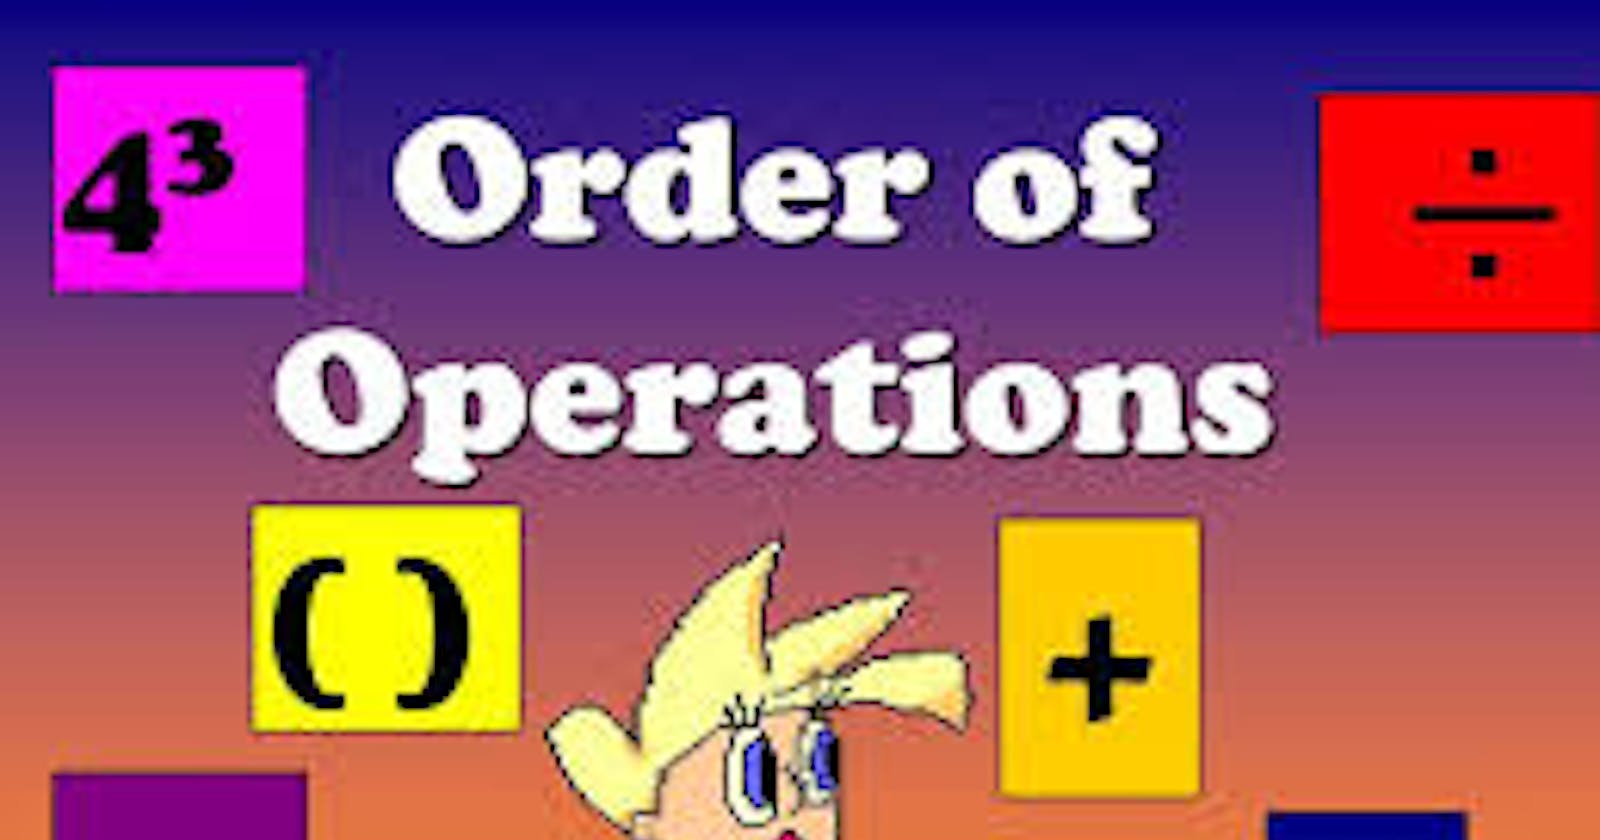 Order of Operations in Python